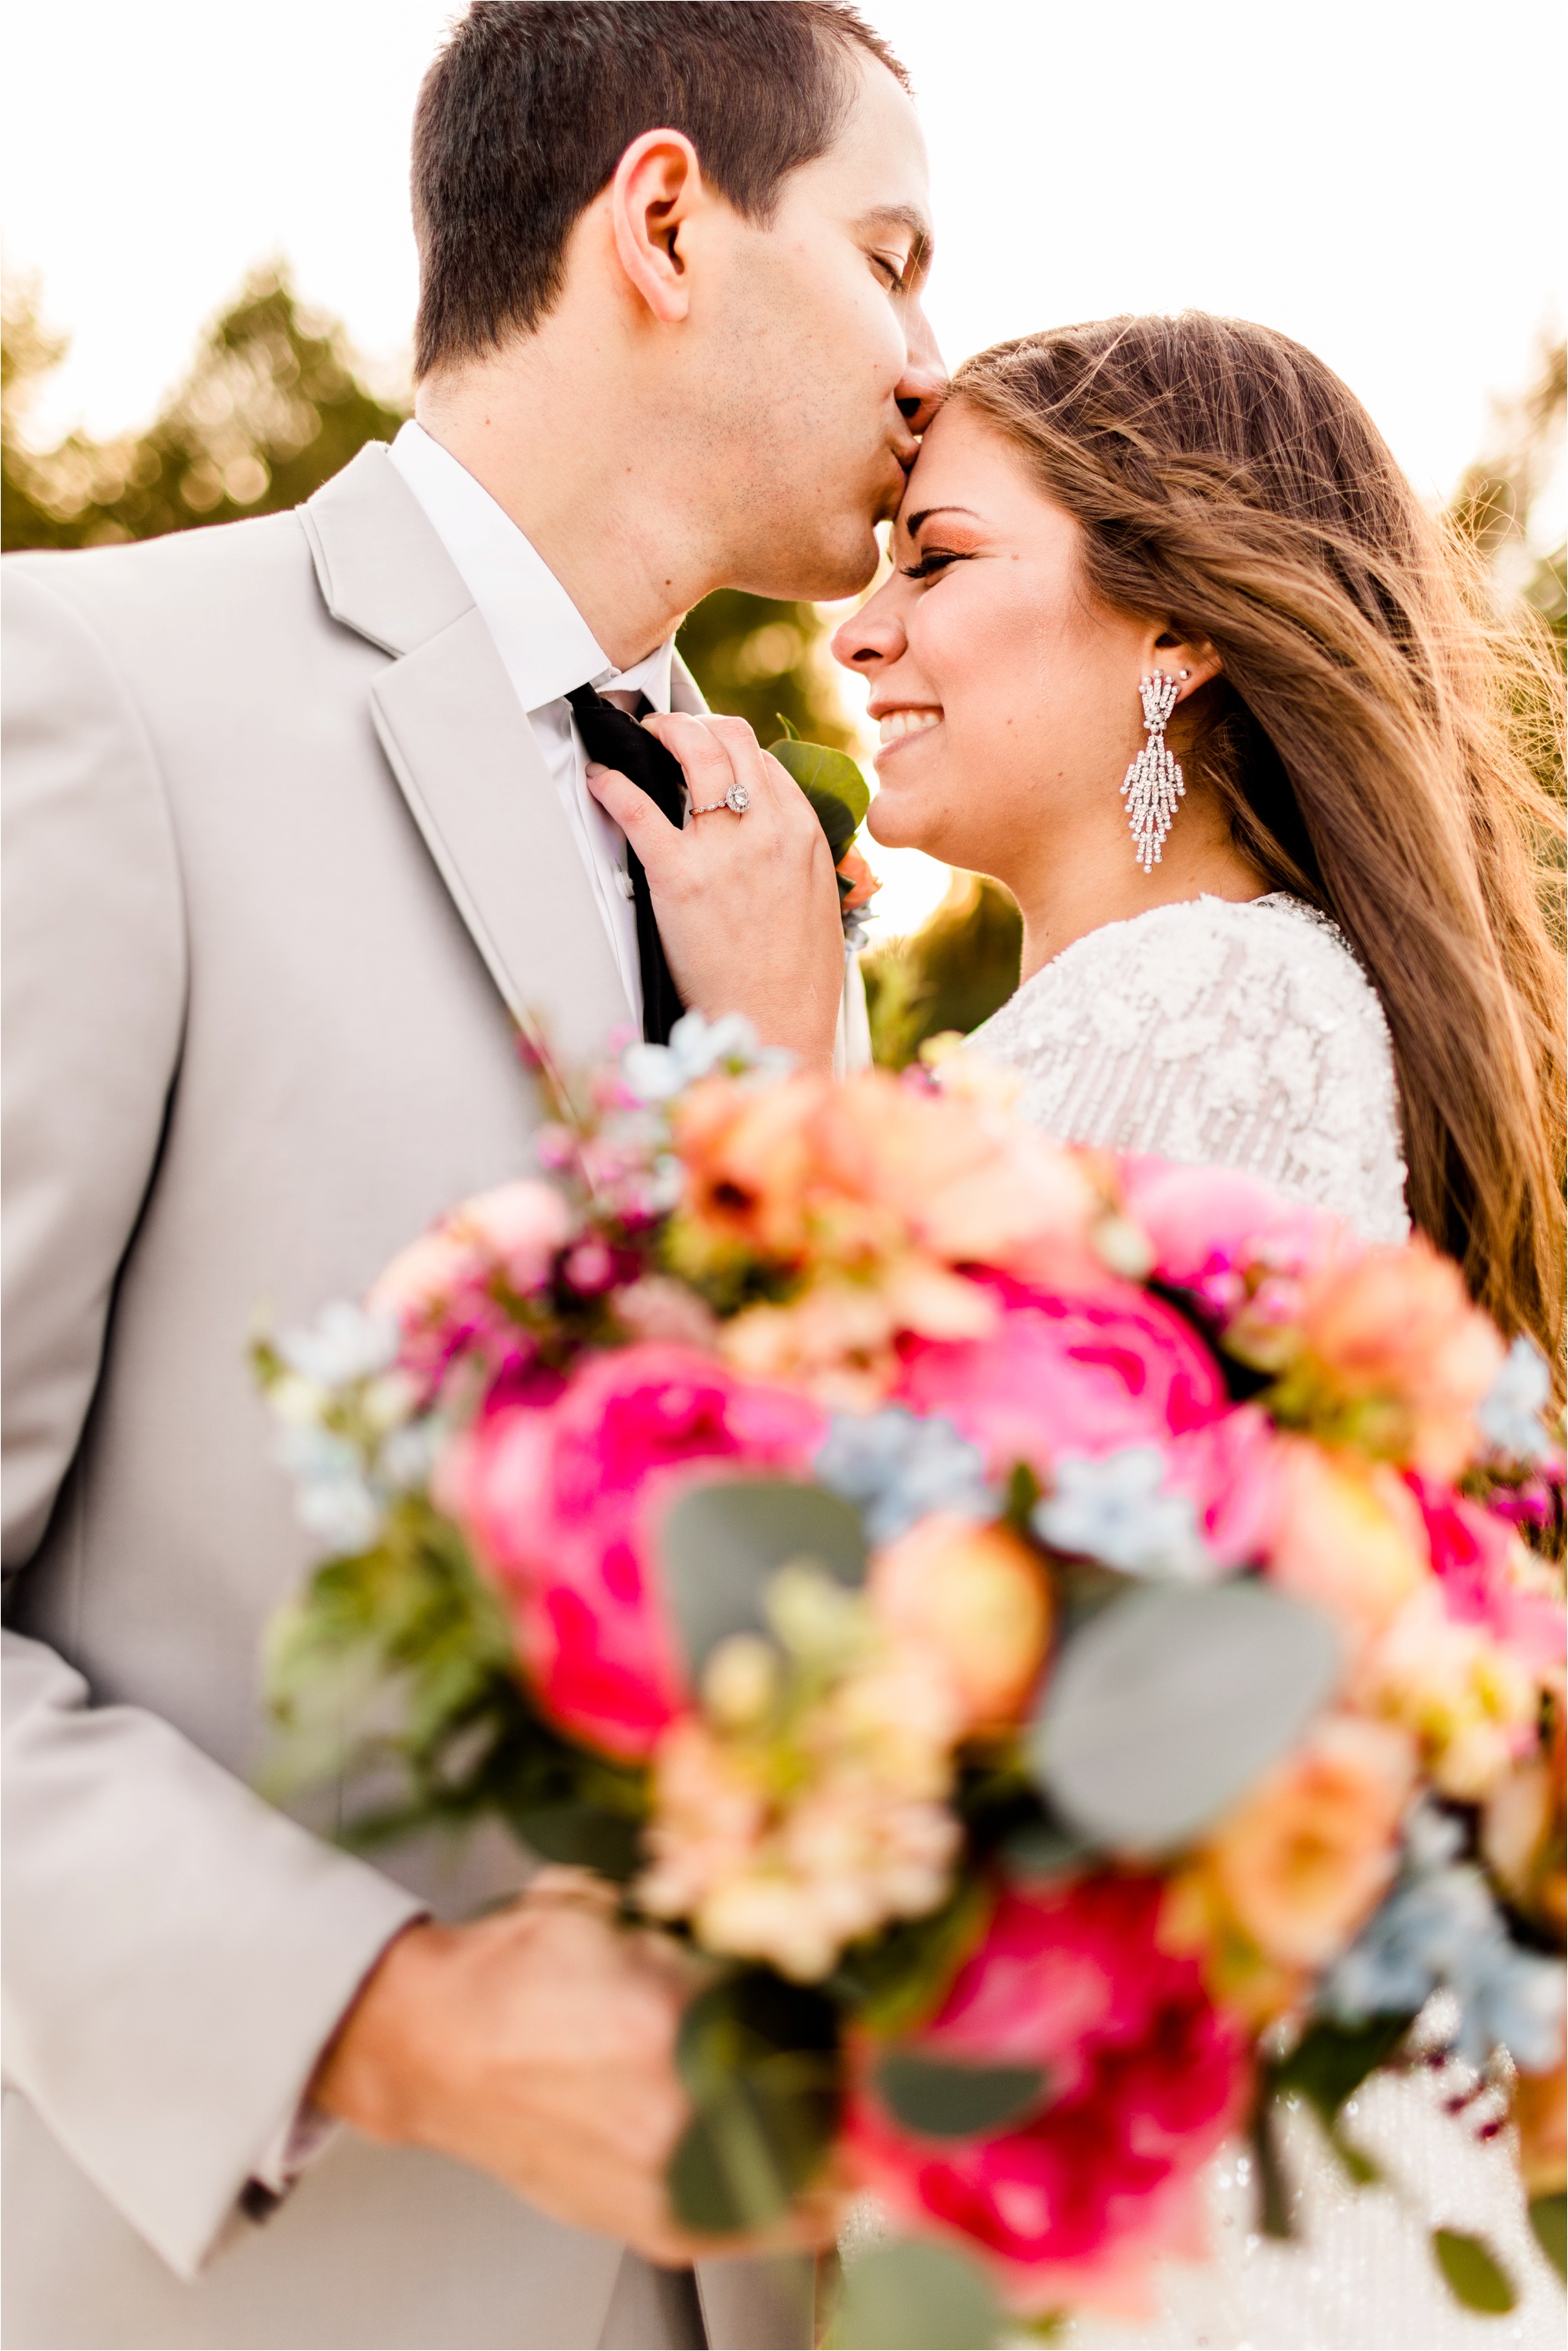 Caitlin and Luke Photography, Illinois Wedding Photographers, Champaign Wedding Photographers, Bloomington Normal Wedding Photographers, Romantic Red and Pink Sunset Styled Shoot_9594.jpg